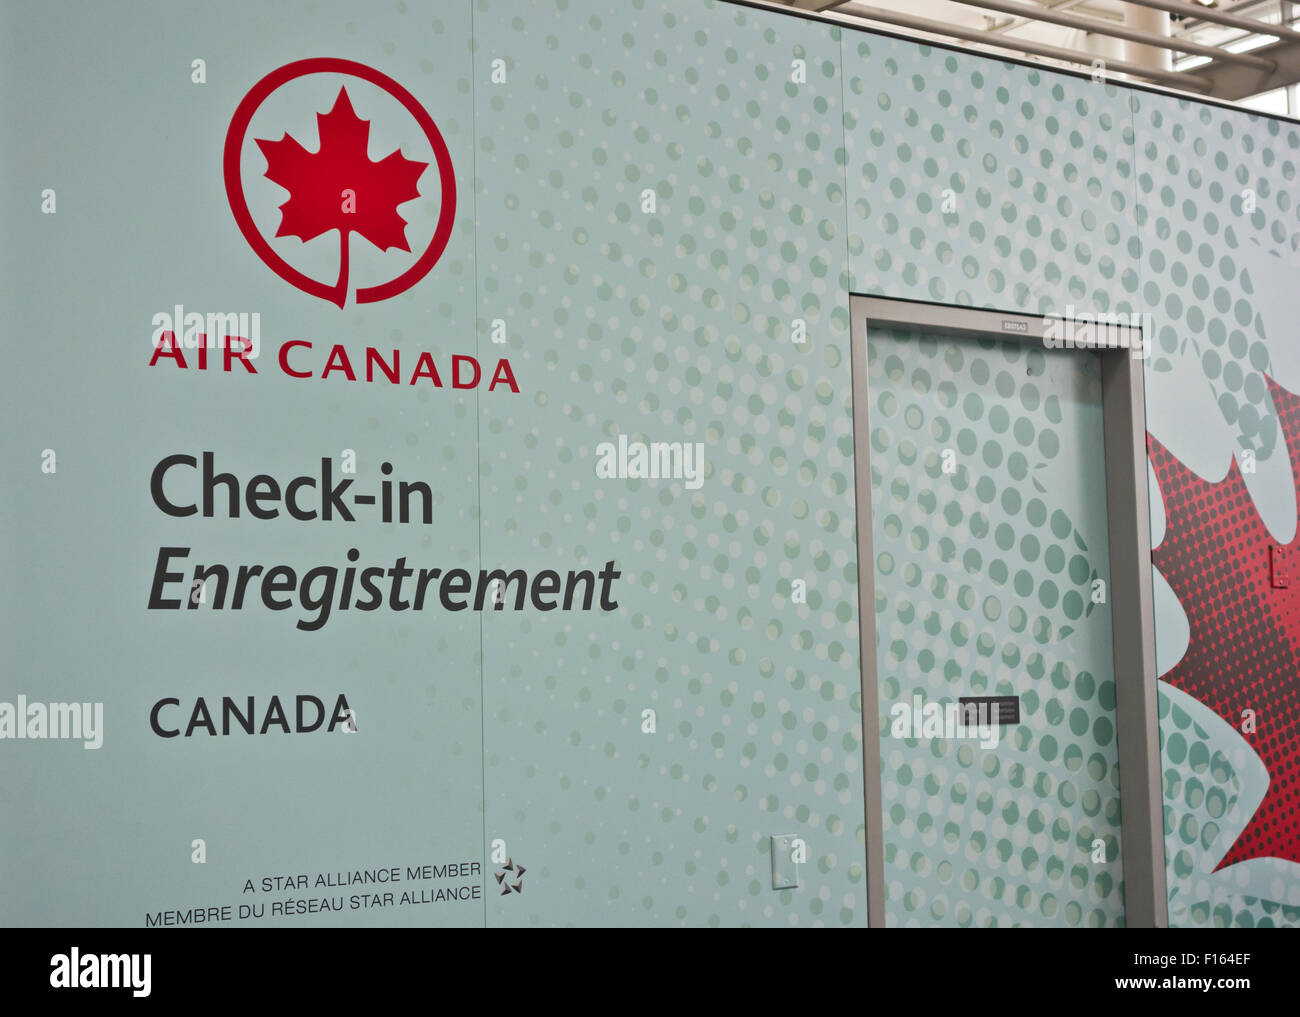 Air Canada Check-in area at Pearson International Airport in Toronto, Ontario Canada.  Sign written in French and English. Stock Photo